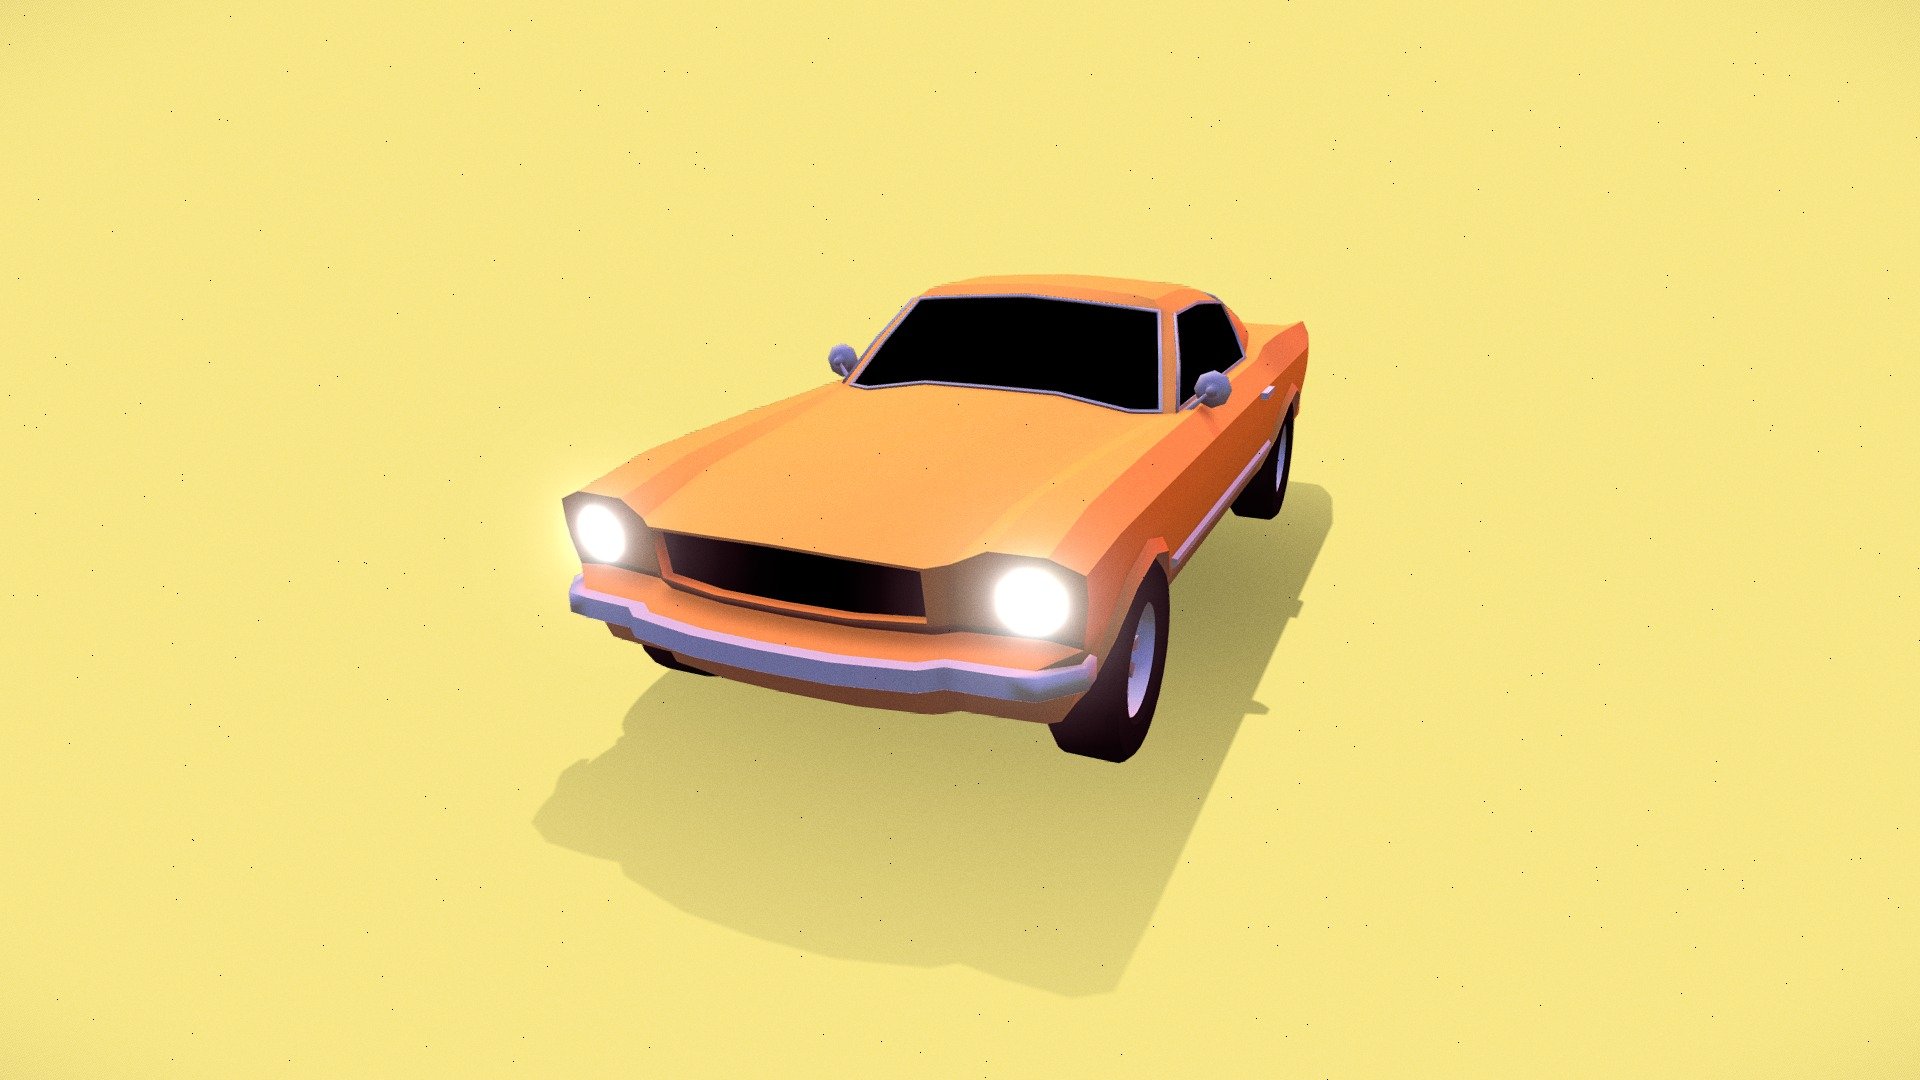 This is a free cartoon Low Poly style car.
* The model supports mobile devices Unity or UE4
In the future I will publish a lot of free models, rate and write a comment to promote my account ;) - FREE Retro American Car Cartoon (Low Poly) - Download Free 3D model by Moonlight (@moonlight2023) 3d model